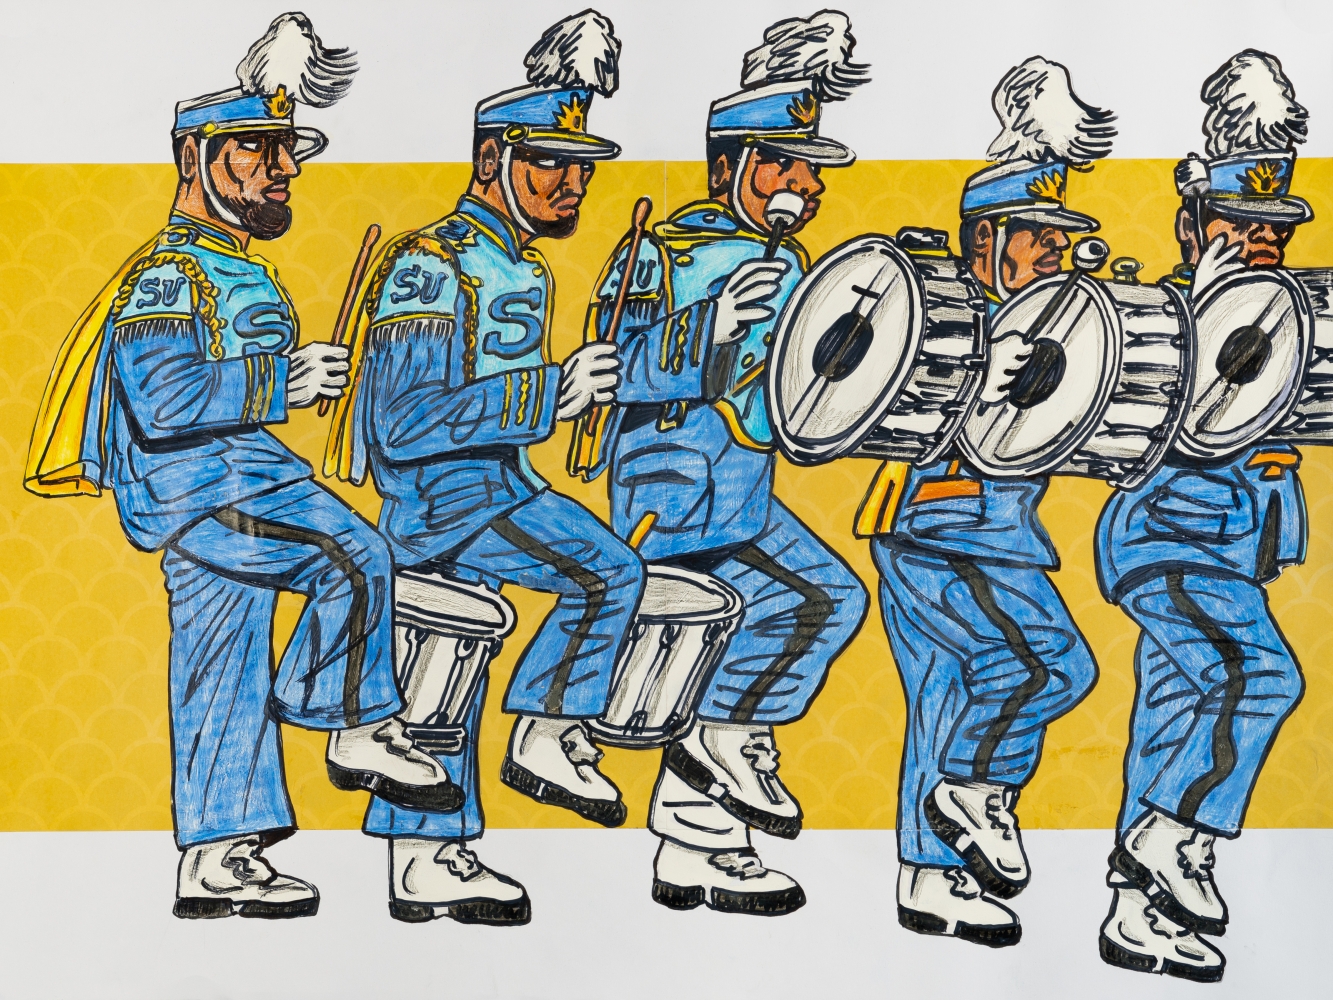 Southern Drum Line 1, 2020&amp;nbsp;

Colored pencil and marker on paper&amp;nbsp;

18 x 24 inches&amp;nbsp;